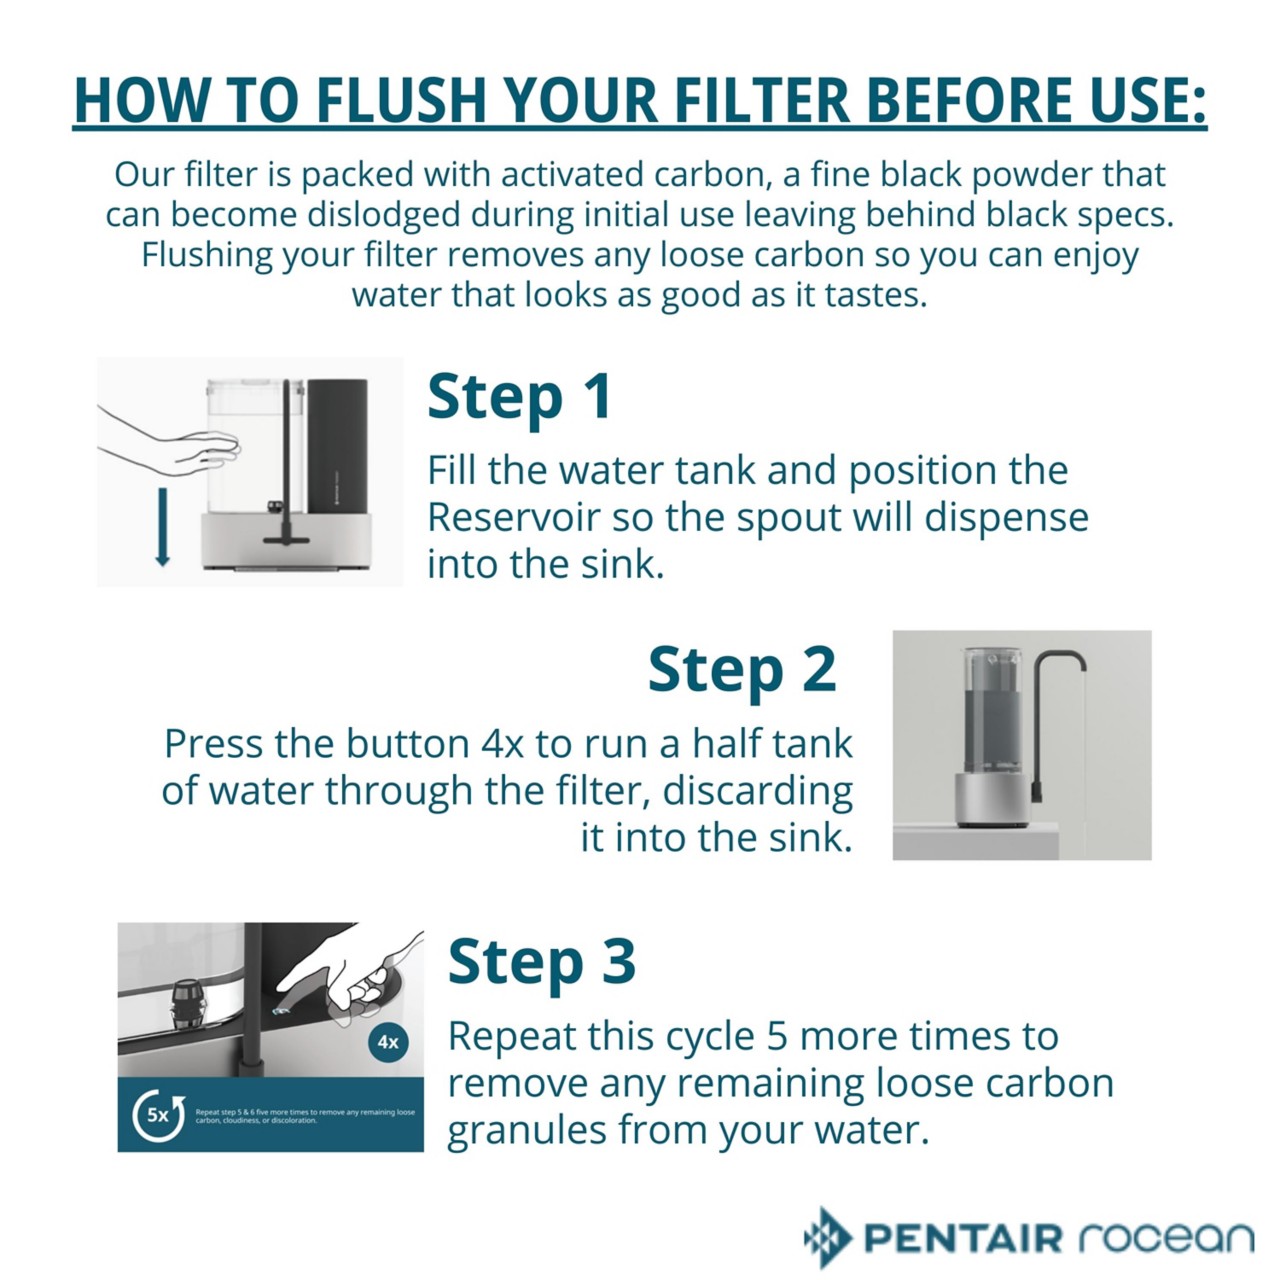 How to flush your filter before use: Our filter is packed with activated carbon, a fine black powder that can become dislodged during initial use leaving behind black specs. Flushing your filter removes any loose carbon so you can enjoy water that looks as good as it tastes. Step 1 Fill the water tank and position the Reservoir so the spout will dispense into the sink. Step 2 Press the button 4 times to run a half tank of water through the filter, discarding it into the sink. Step 3 Repeat this cycle 5 more times to remove any remaining loose carbon granules from your water.